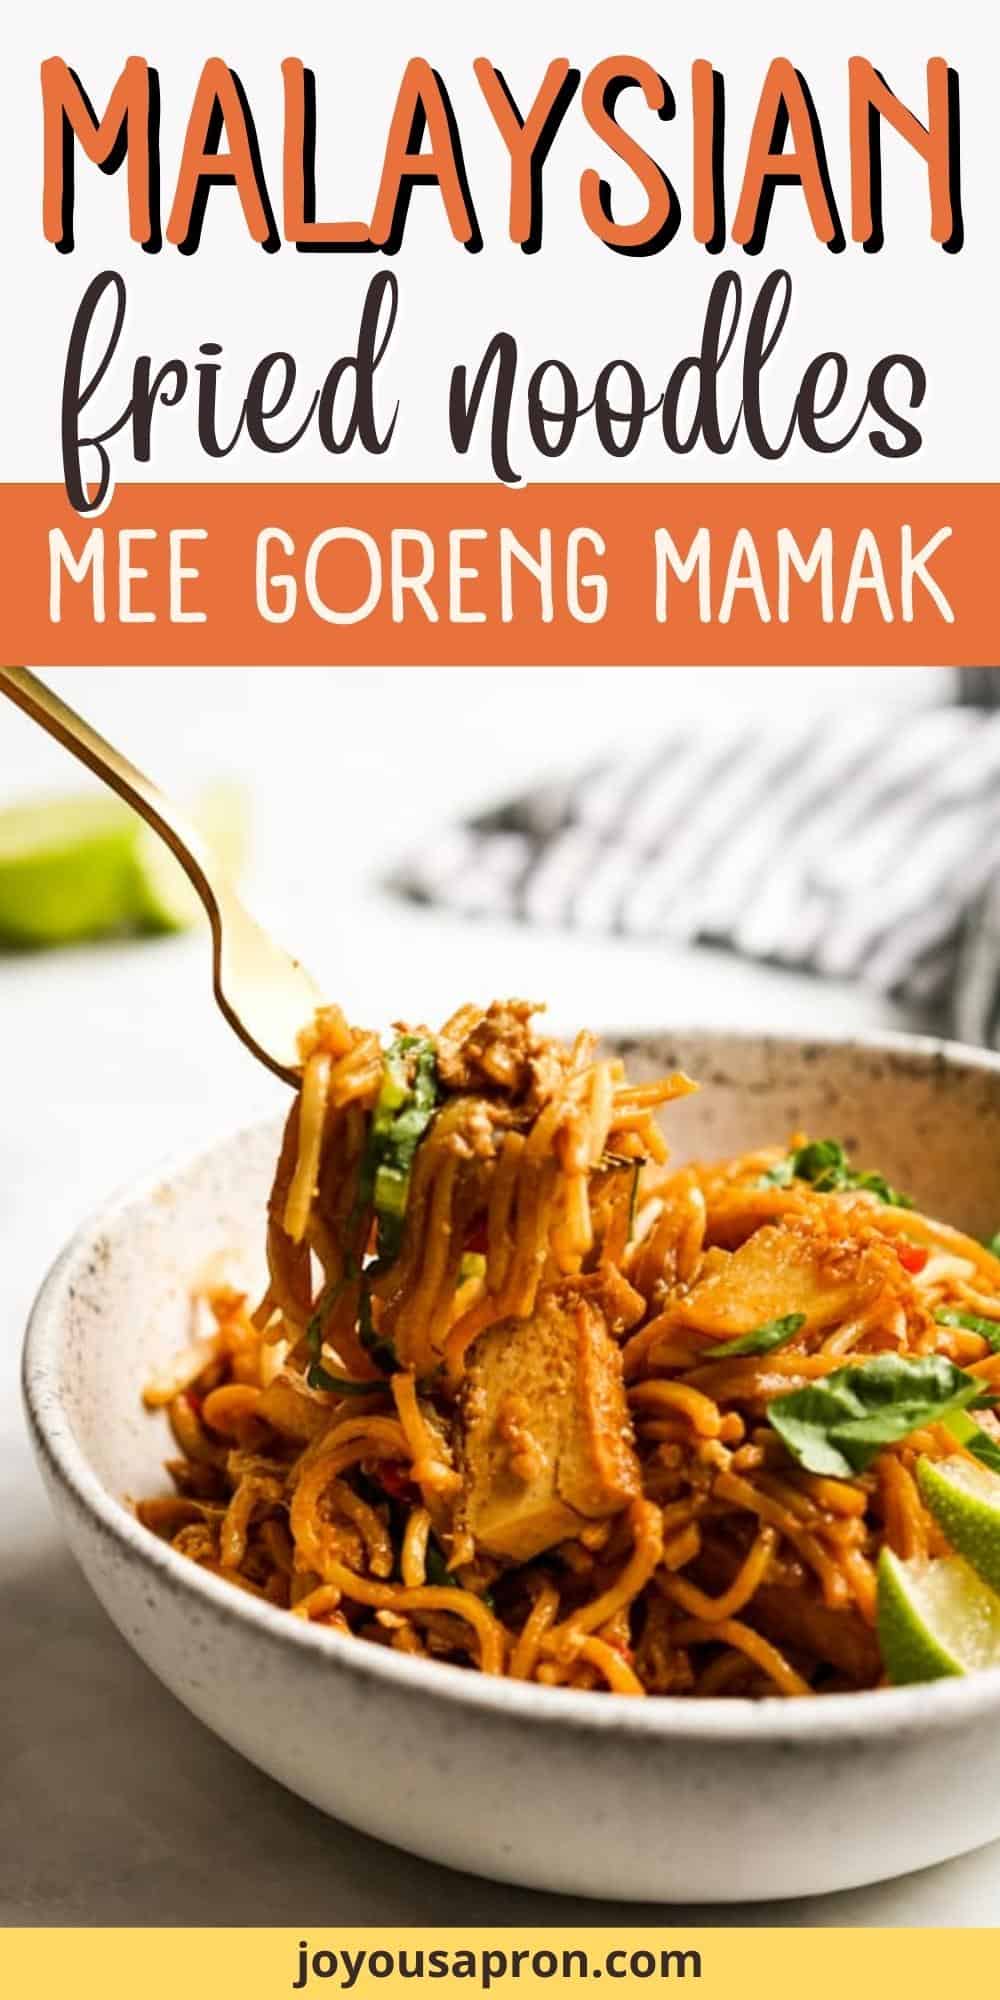 Mee Goreng (Mamak Style) - Malaysian noodle recipe! Vegetarian friendly. Stir fried yellow noodles combined with red potatoes, tofu, beans sprouts, and eggs, tossed in a bold flavored sticky, sour, spicy, and sweet sauce. via @joyousapron